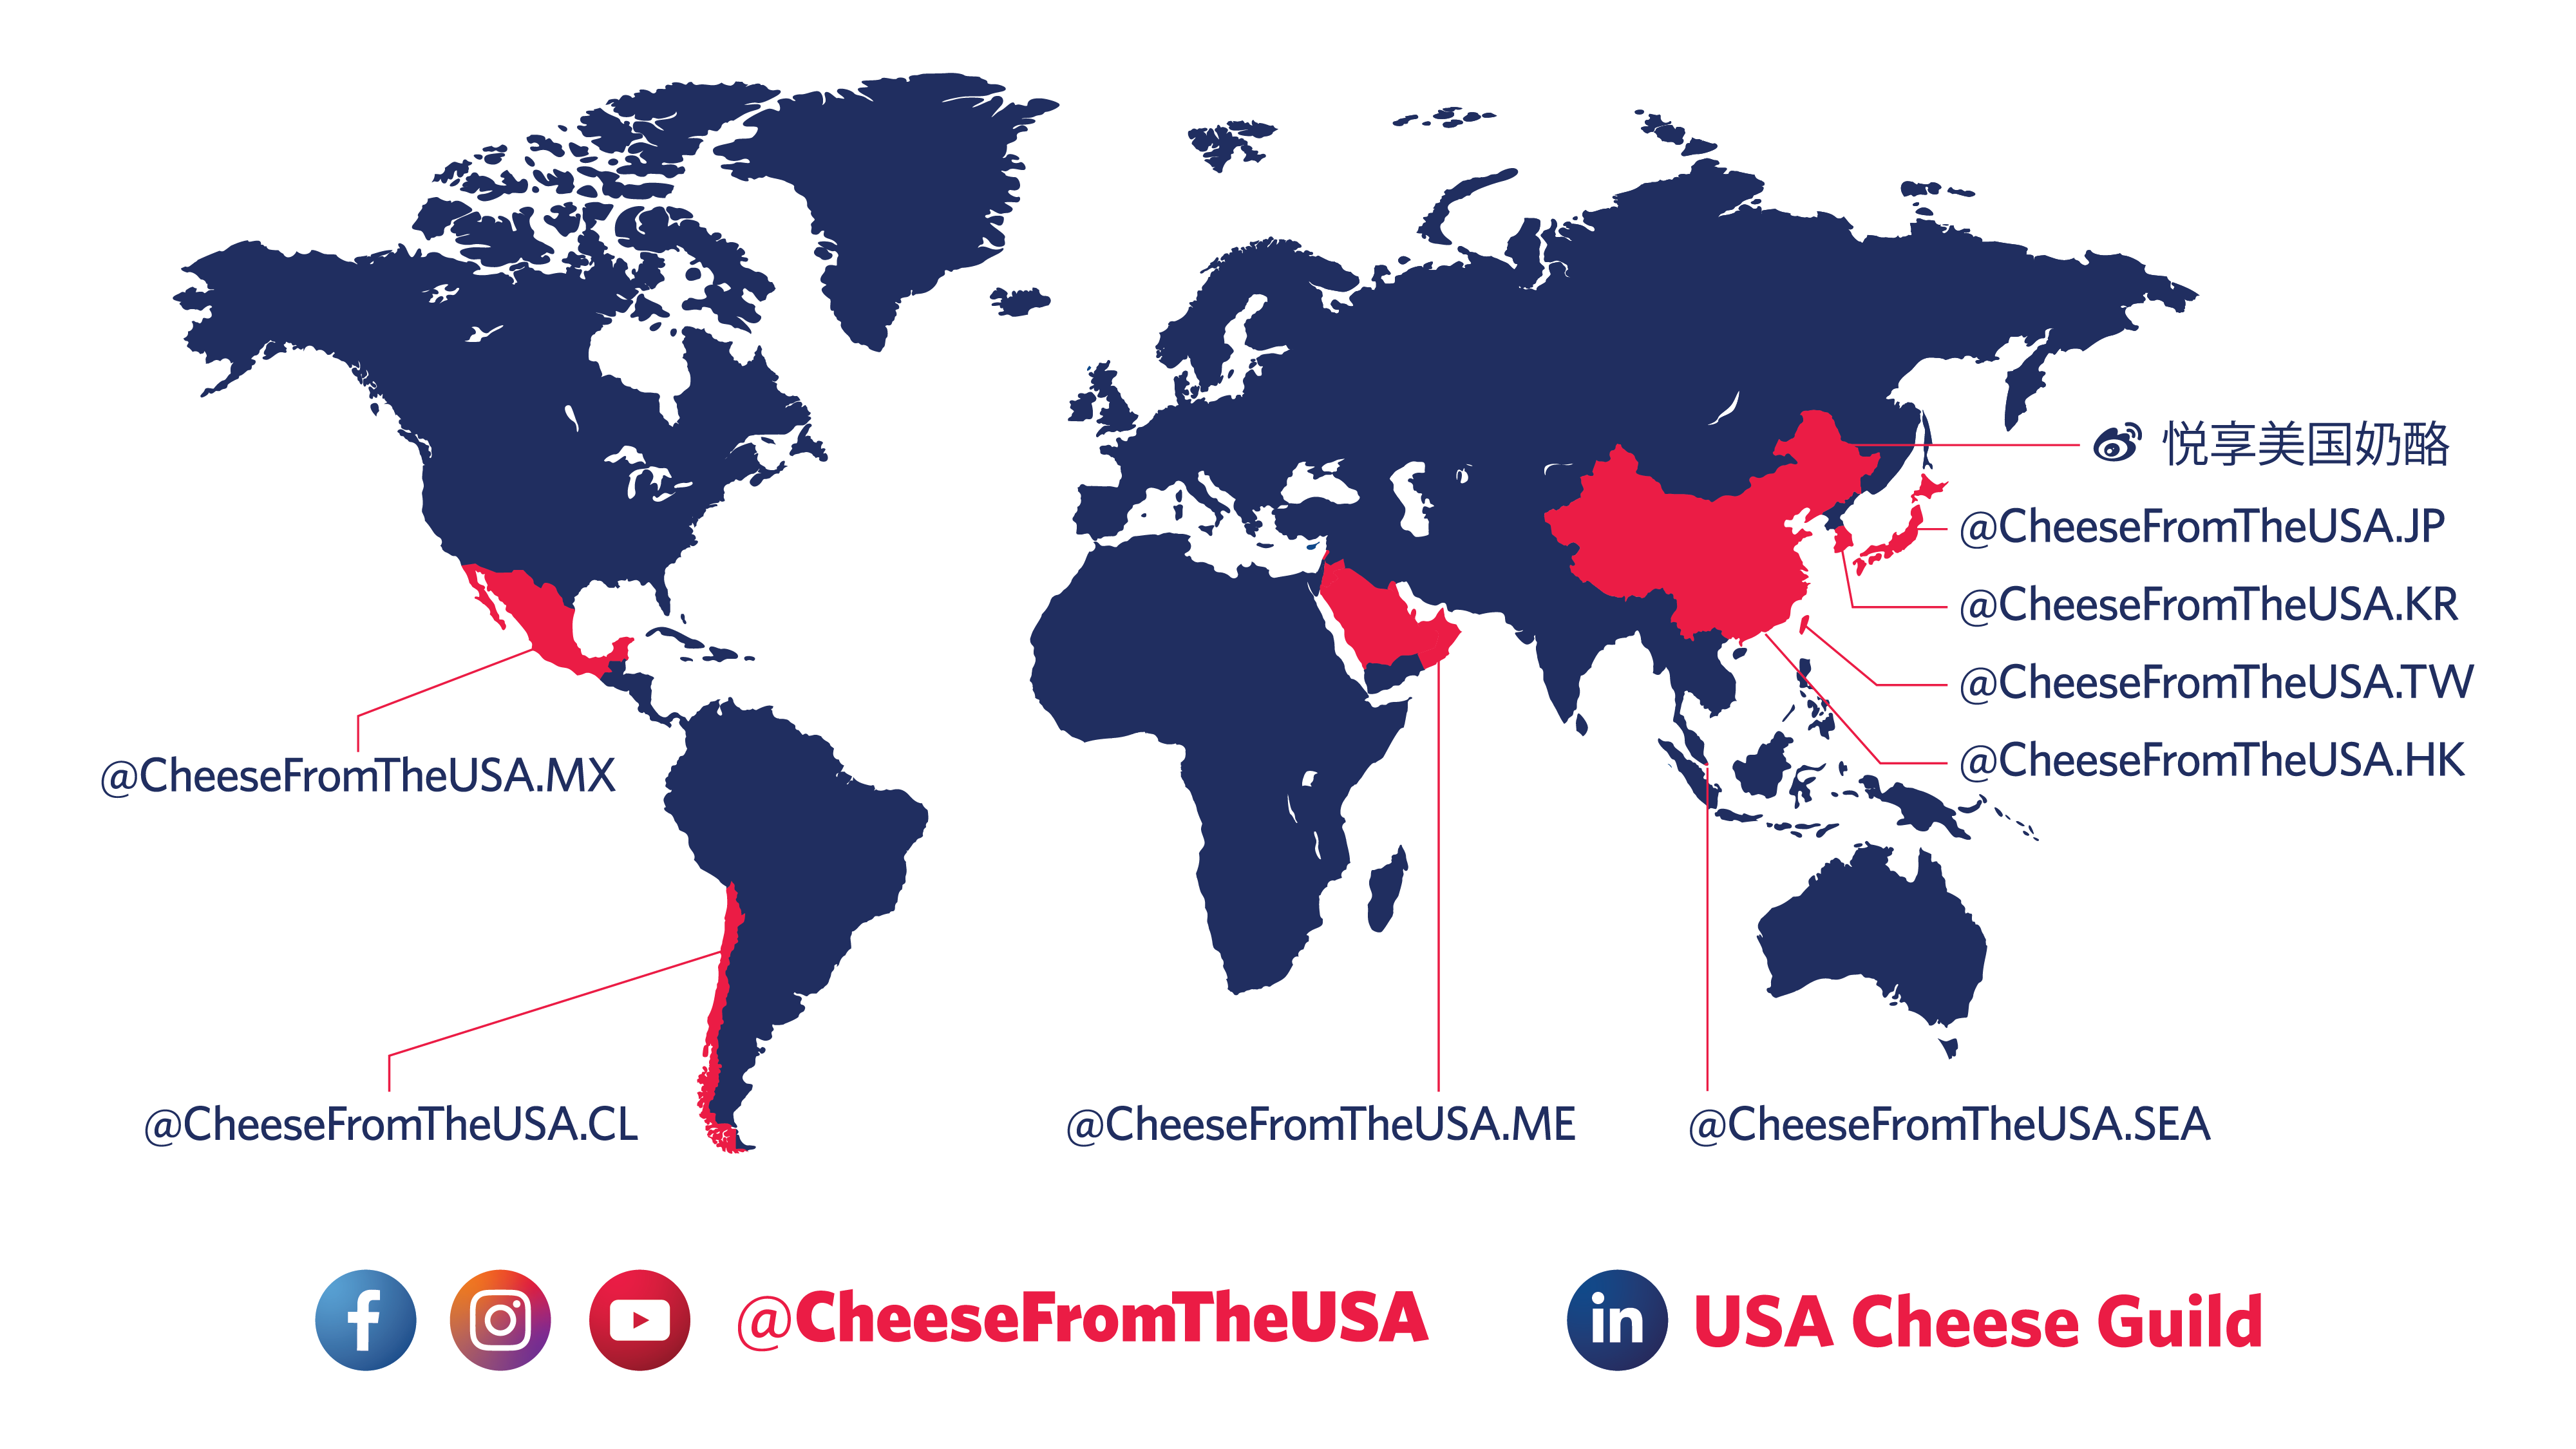 Cheese from the USA social media map